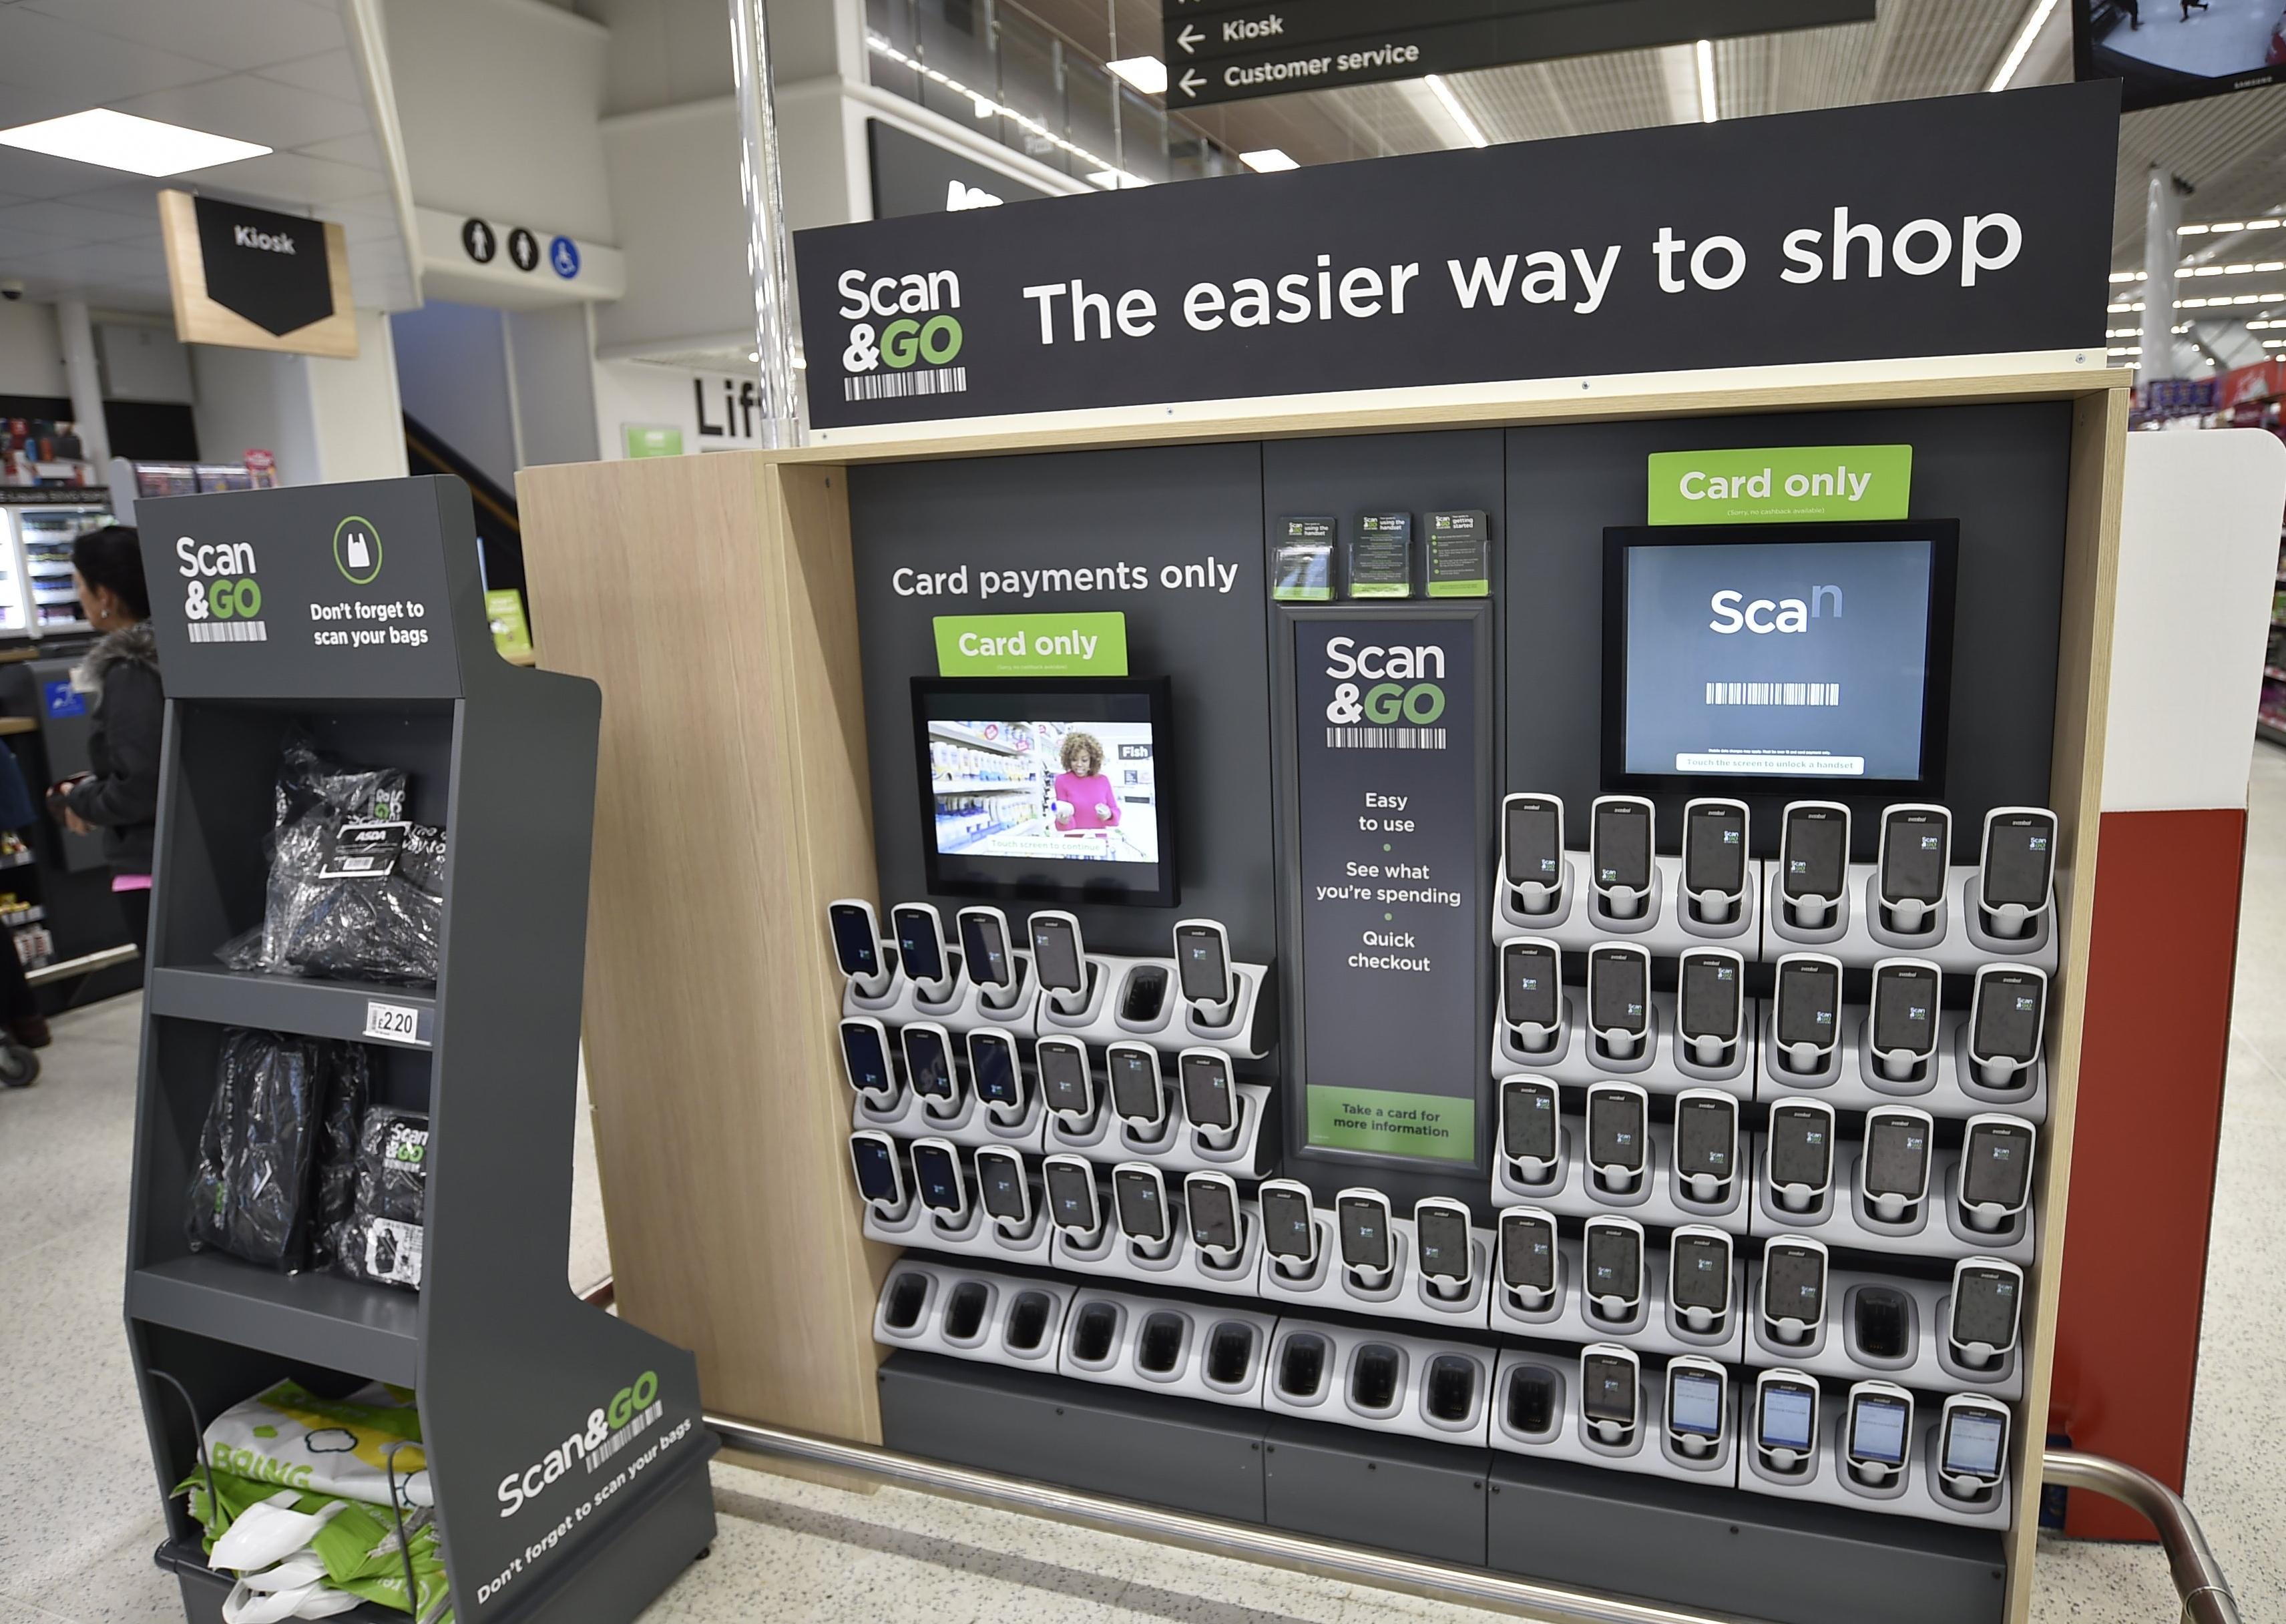 Customers can scan items as they shop to save time at the checkout